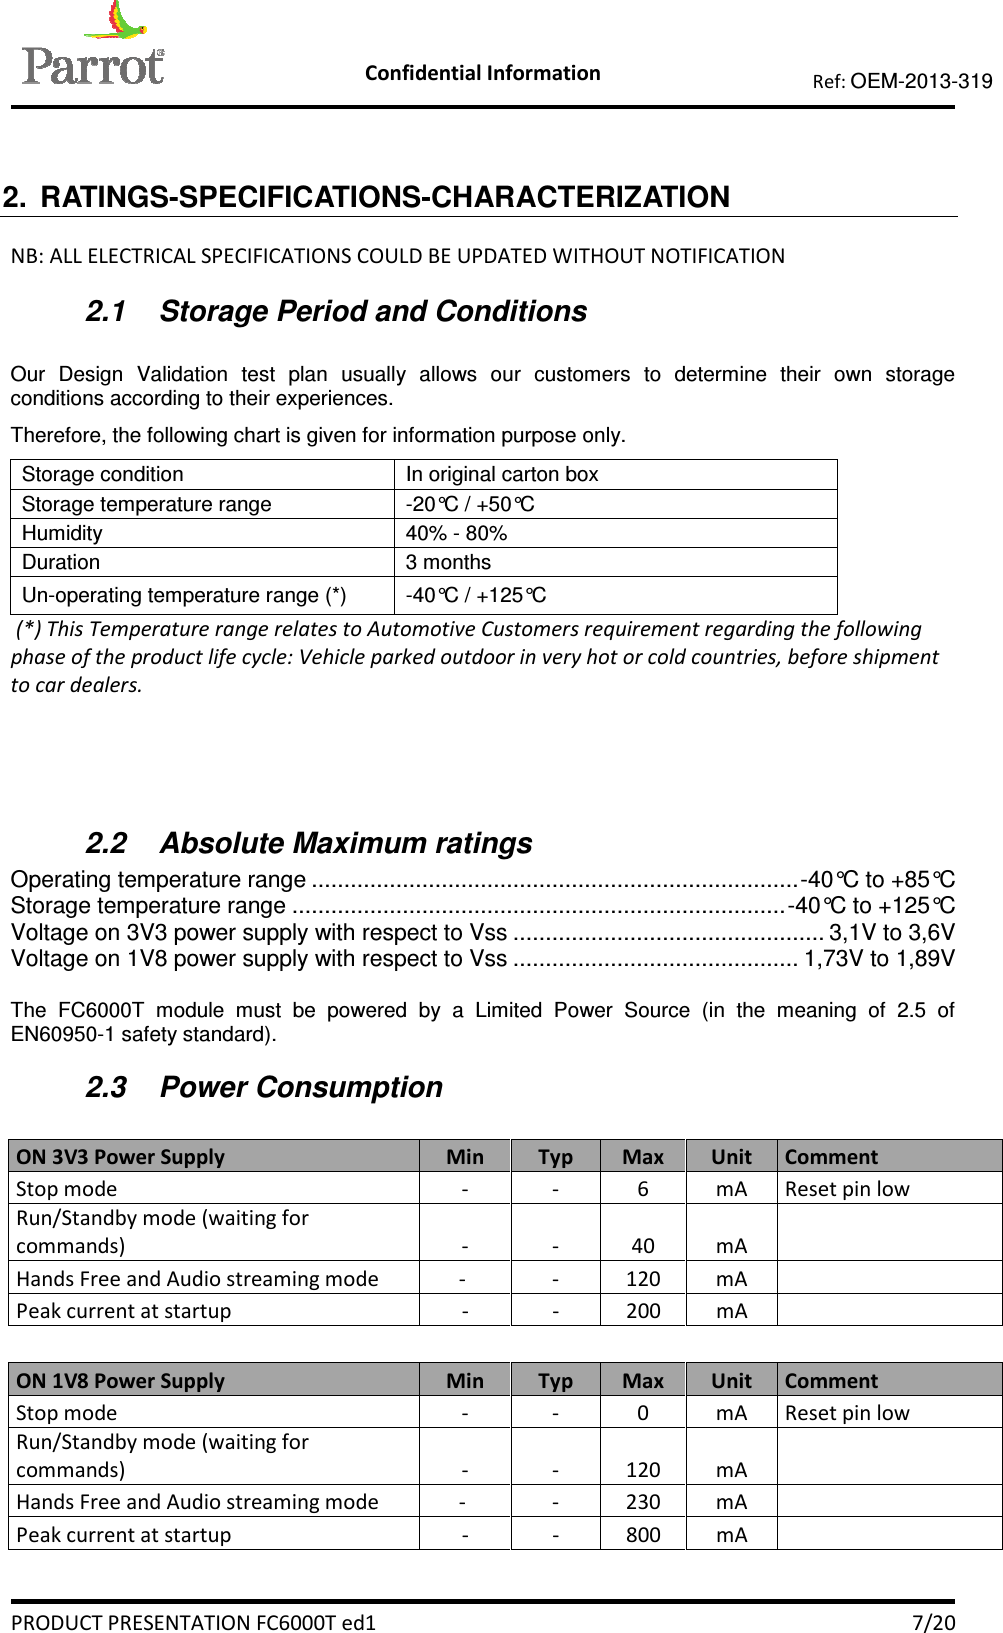    Confidential Information   PRODUCT PRESENTATION FC6000T ed1    7/20 Ref: OEM-2013-319   2.  RATINGS-SPECIFICATIONS-CHARACTERIZATION NB: ALL ELECTRICAL SPECIFICATIONS COULD BE UPDATED WITHOUT NOTIFICATION 2.1  Storage Period and Conditions   Our  Design  Validation  test  plan  usually  allows  our  customers  to  determine  their  own  storage conditions according to their experiences. Therefore, the following chart is given for information purpose only. Storage condition  In original carton box Storage temperature range  -20°C / +50°C Humidity  40% - 80% Duration  3 months Un-operating temperature range (*)  -40°C / +125°C  (*) This Temperature range relates to Automotive Customers requirement regarding the following phase of the product life cycle: Vehicle parked outdoor in very hot or cold countries, before shipment to car dealers.  2.2  Absolute Maximum ratings  Operating temperature range ........................................................................... -40°C to +85°C Storage temperature range ............................................................................ -40°C to +125°C Voltage on 3V3 power supply with respect to Vss ................................................ 3,1V to 3,6V Voltage on 1V8 power supply with respect to Vss ............................................ 1,73V to 1,89V  The  FC6000T  module  must  be  powered  by  a  Limited  Power  Source  (in  the  meaning  of  2.5  of EN60950-1 safety standard). 2.3  Power Consumption   ON 3V3 Power Supply  Min  Typ  Max  Unit  Comment Stop mode  -  -  6  mA  Reset pin low Run/Standby mode (waiting for commands)  -  -  40  mA    Hands Free and Audio streaming mode  -   -  120  mA    Peak current at startup  -  -  200  mA     ON 1V8 Power Supply  Min  Typ  Max  Unit  Comment Stop mode  -  -  0  mA  Reset pin low Run/Standby mode (waiting for commands)  -  -  120  mA    Hands Free and Audio streaming mode  -   -  230  mA    Peak current at startup  -  -  800  mA     